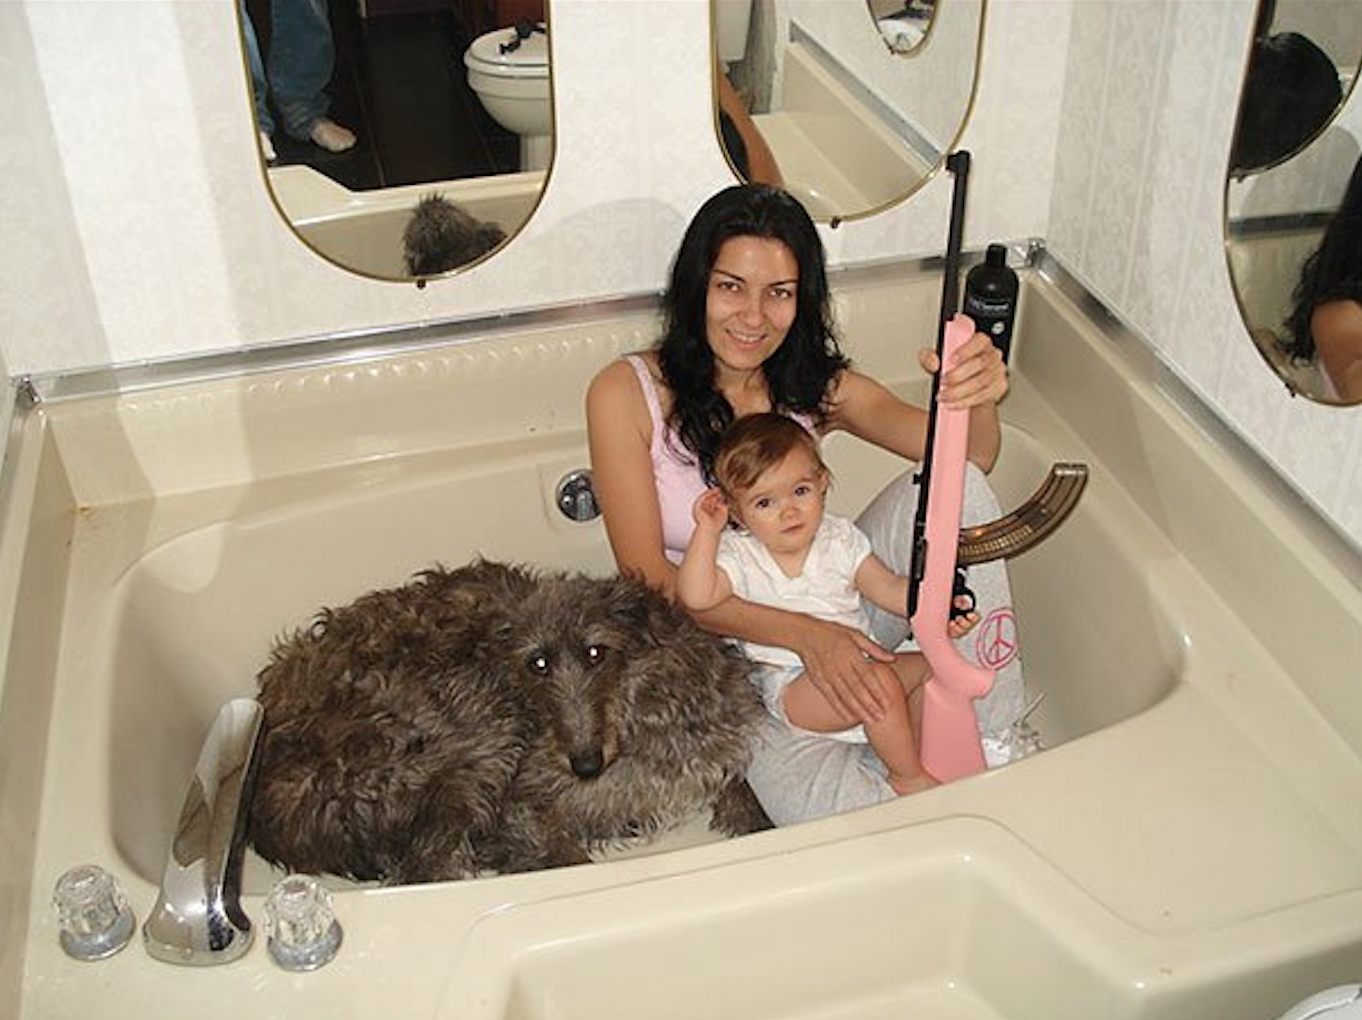 Mom, Baby And Animal In Bath Tub Funny Nonsense Image